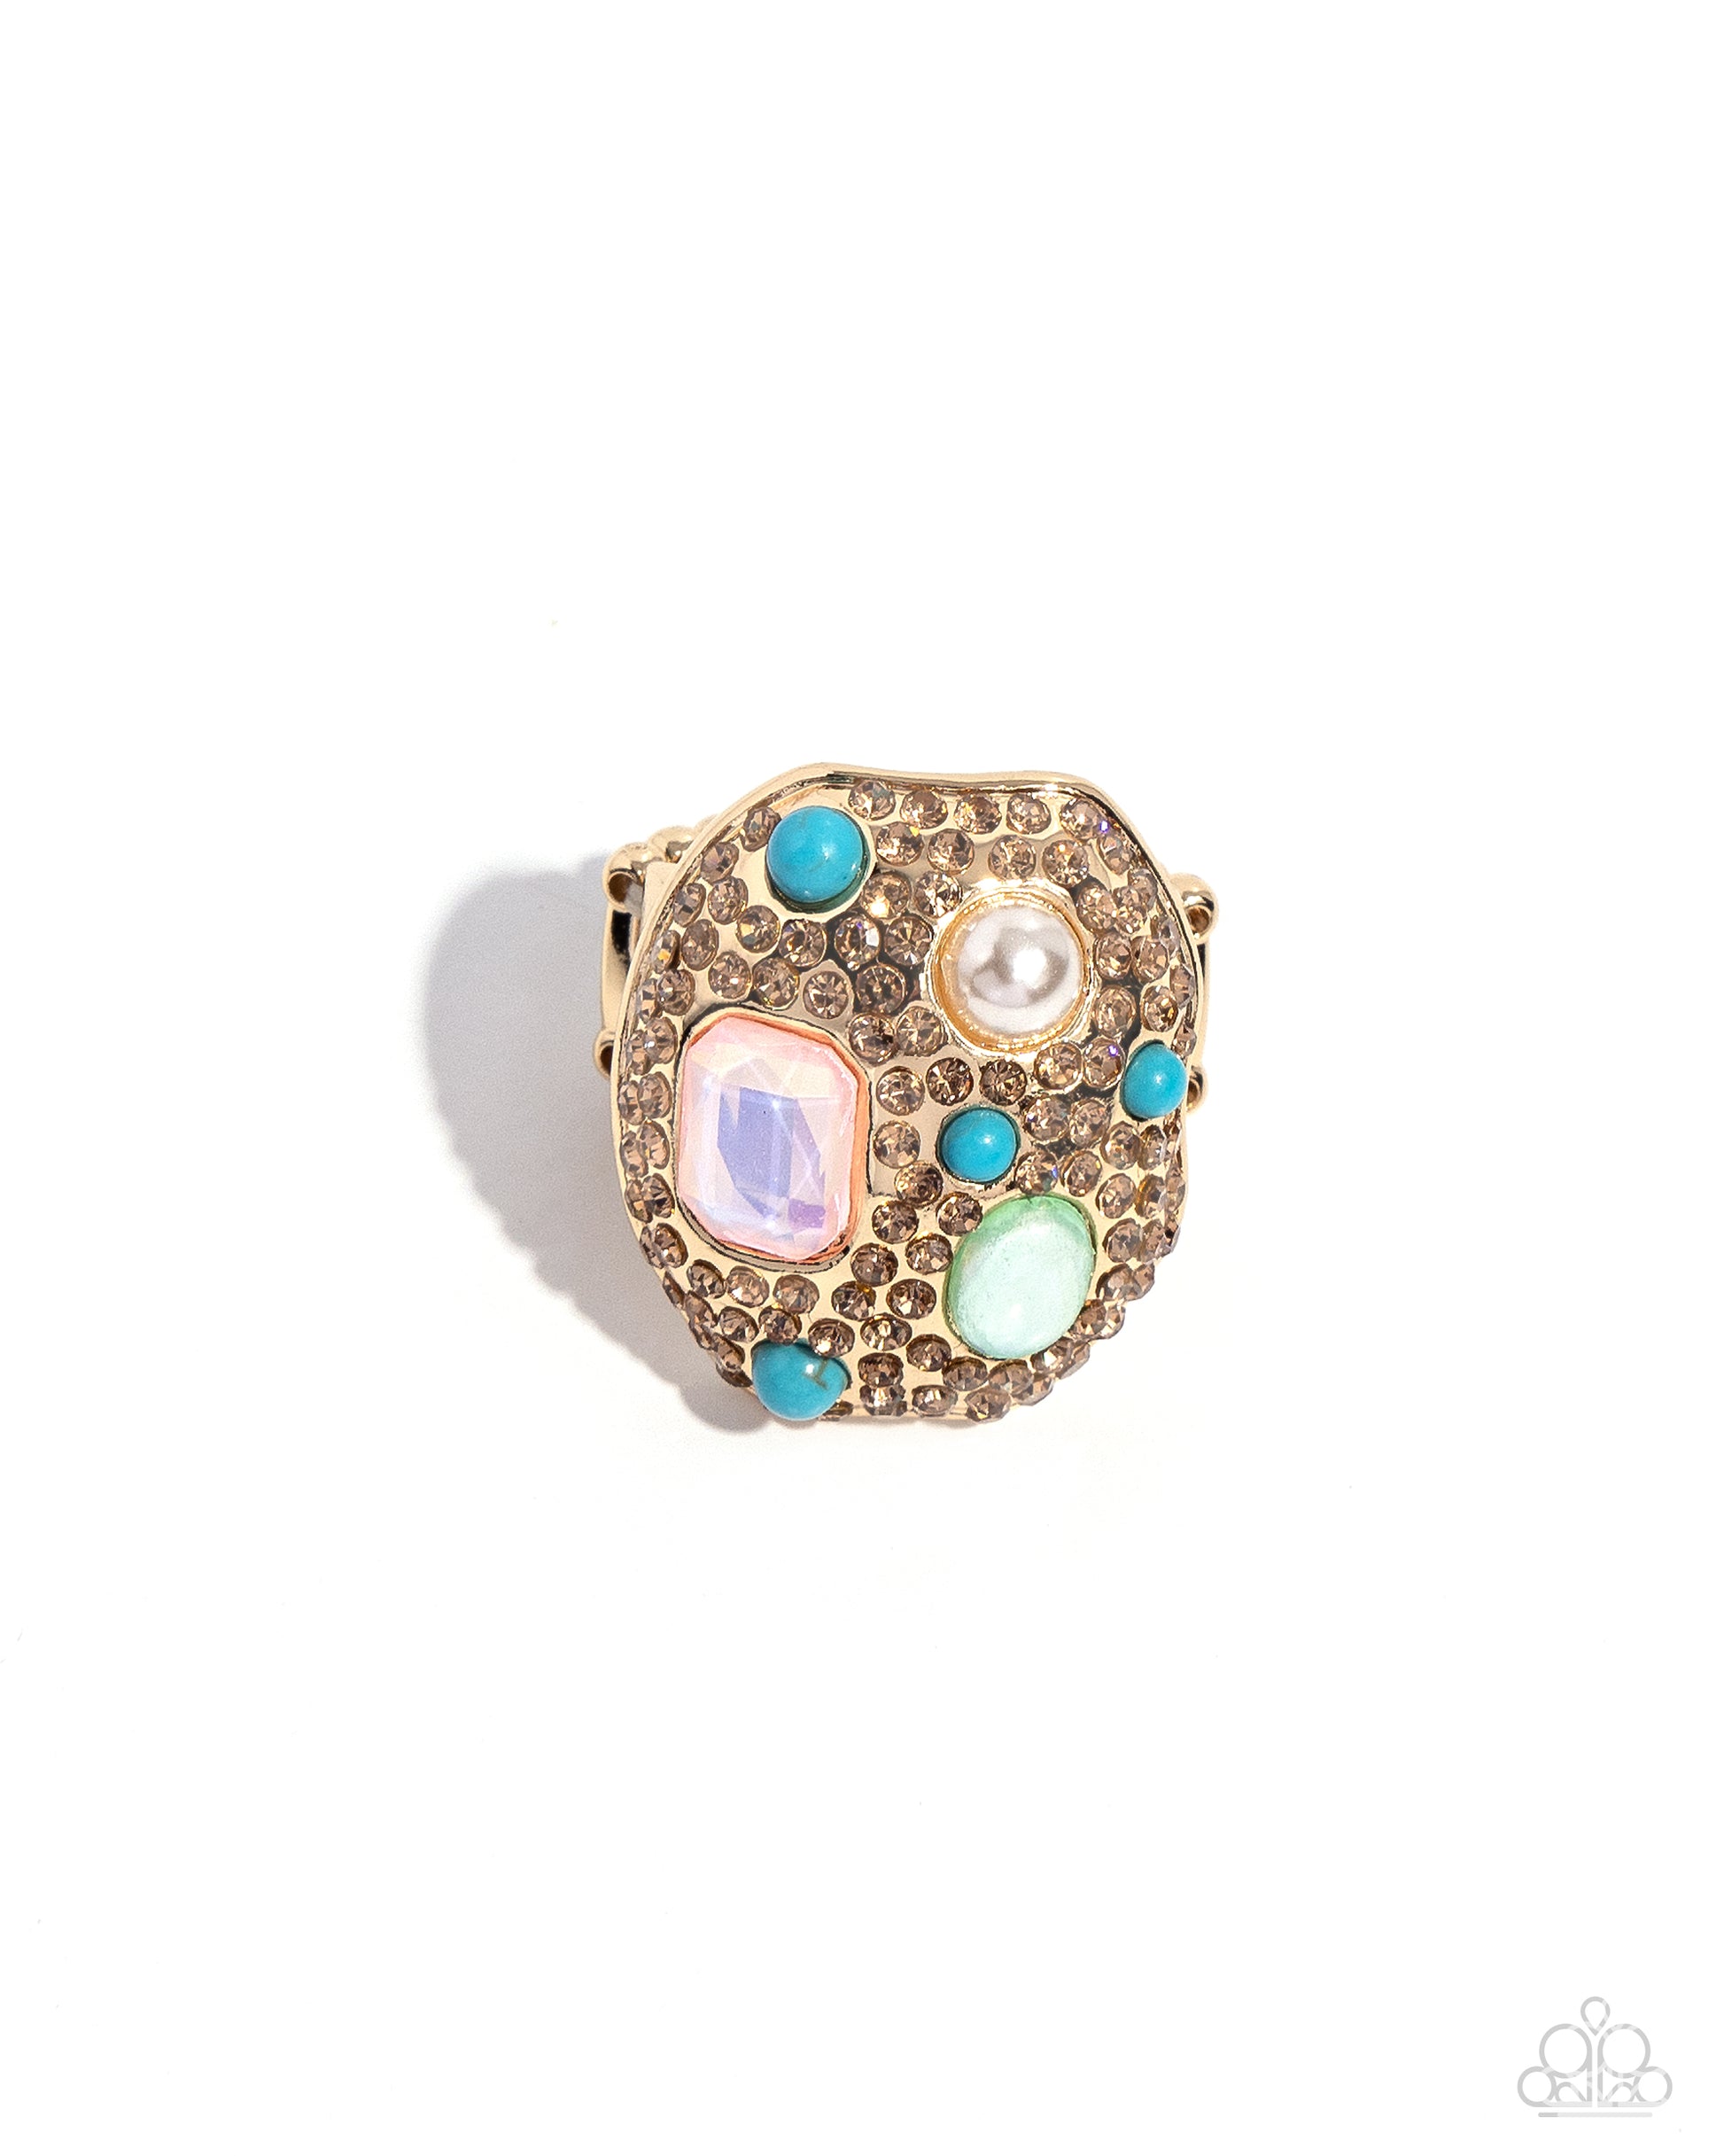 Paparazzi Accessories - Active Artistry - Gold Rings embellished light-colored topaz rhinestones, an oval abstract gold ring glitters atop the finger. Turquoise beads, a white pearl, an emerald-cut pink iridescent gem, and a green opalescent oval bead create additional color and shine. Features a stretchy band for a flexible fit. Due to its prismatic palette, color may vary. Sold as one individual ring.